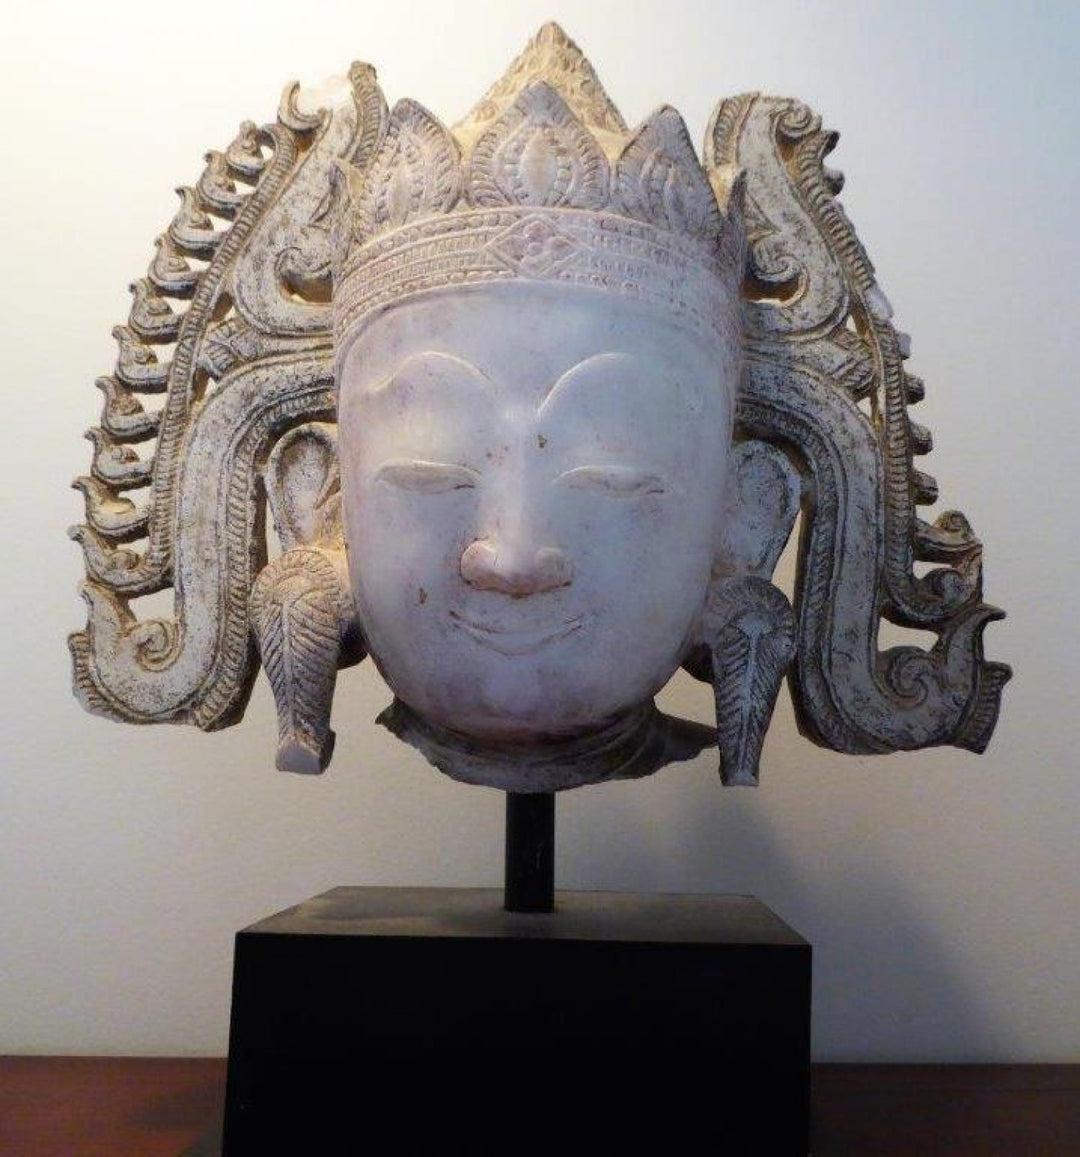 Crowned Head of a Buddha, 18th century